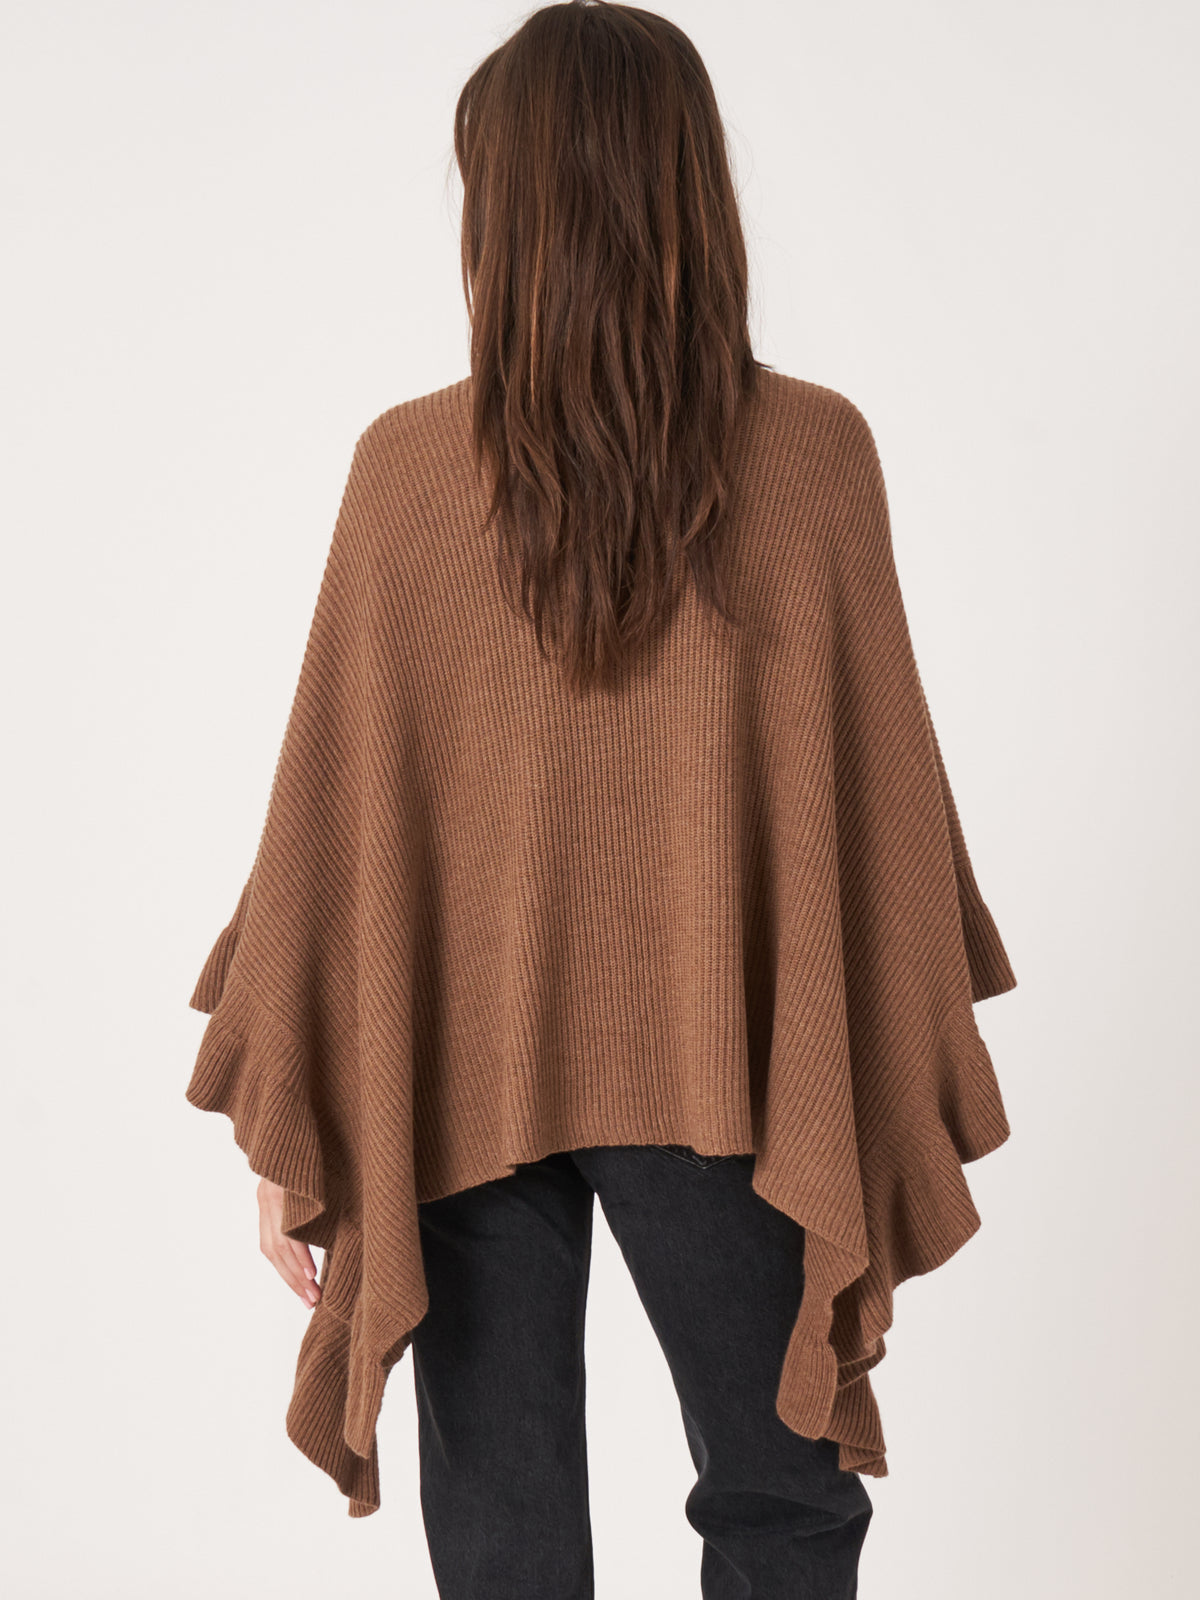 Repeat Rib Knit Cape With Ruffle